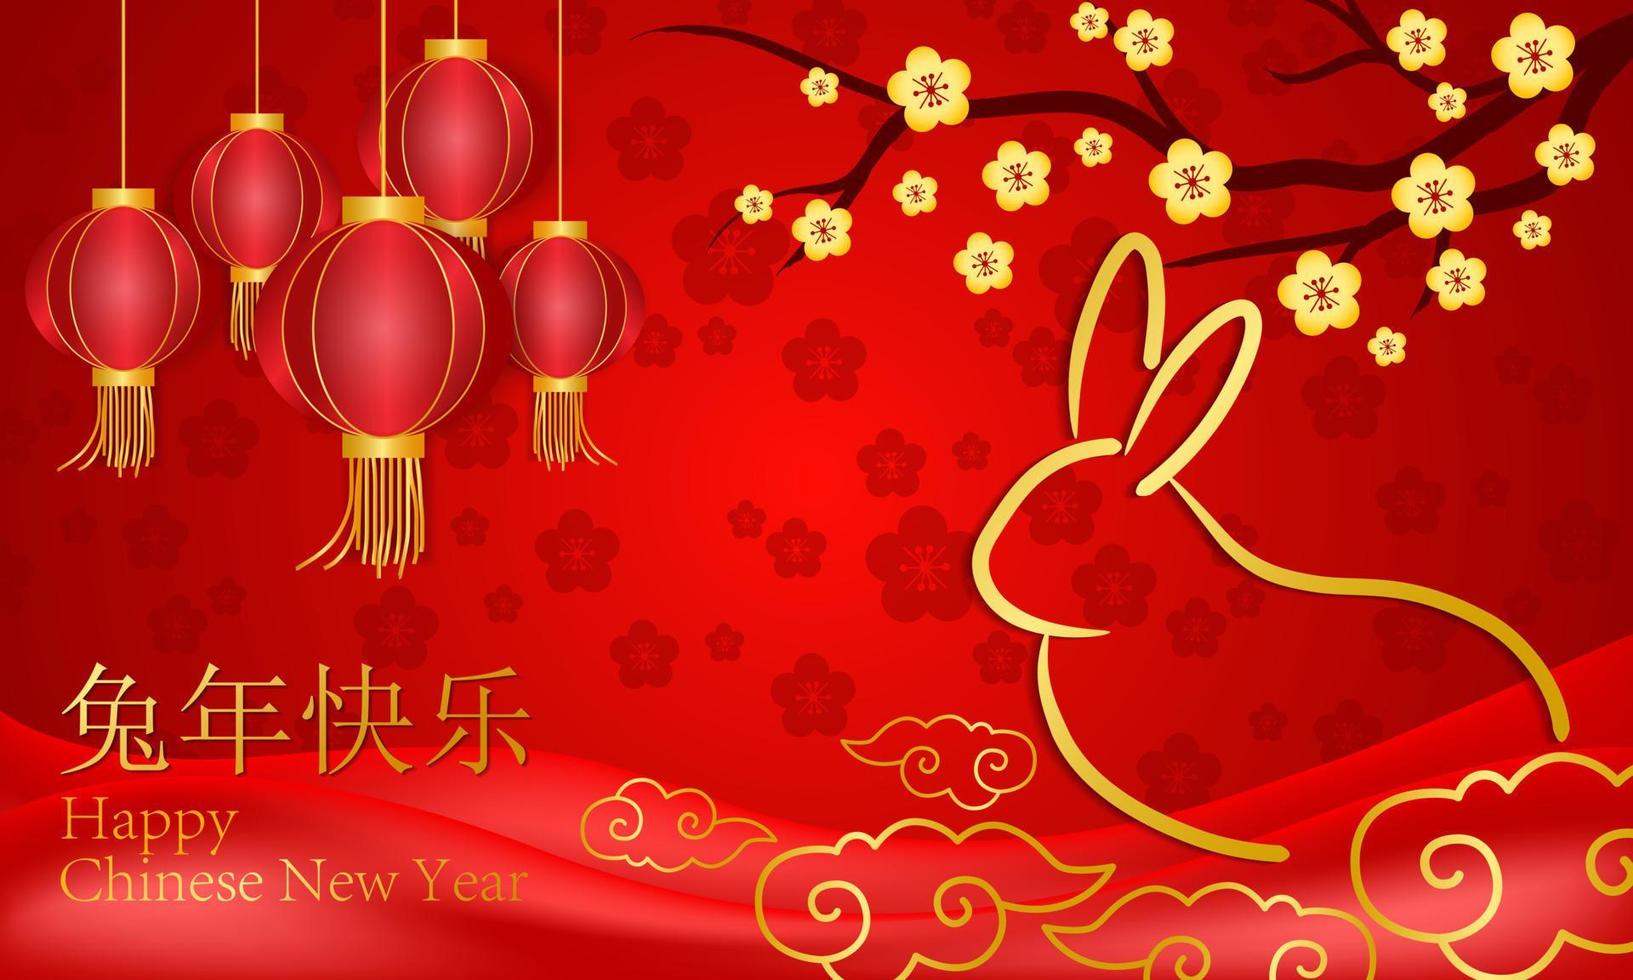 Chinese New Year. Year of the rabbit red and gold on background. Vector Design.illustration.